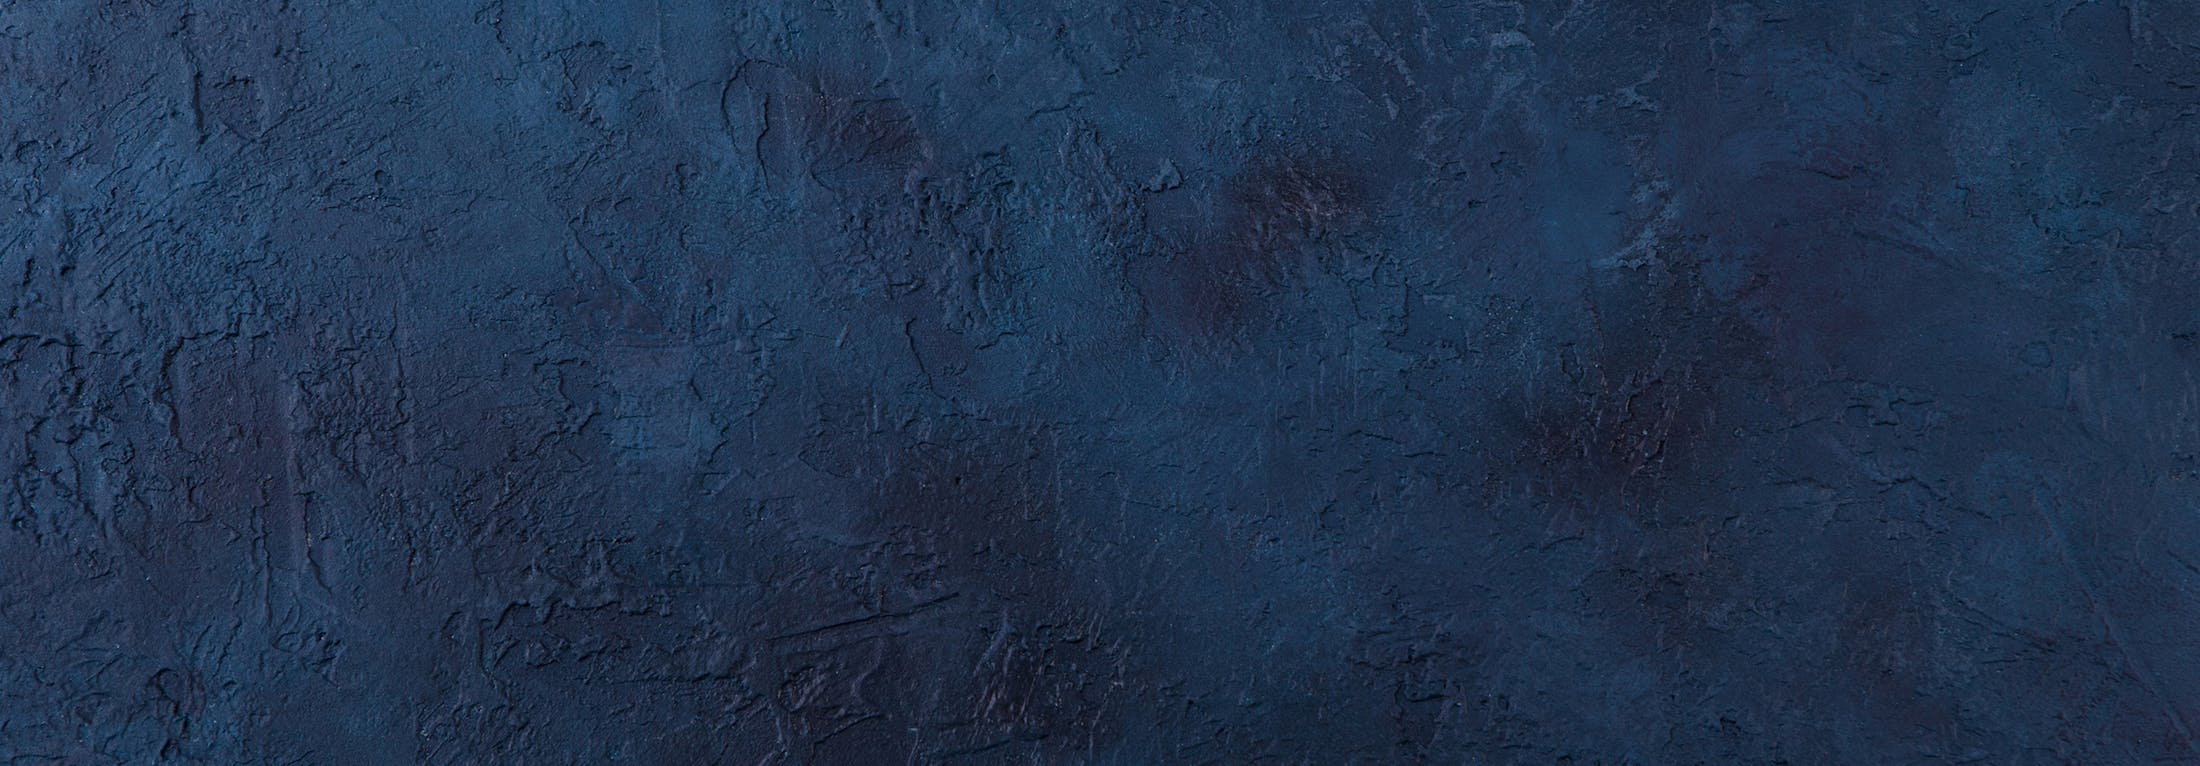 close up of a blue painted wall